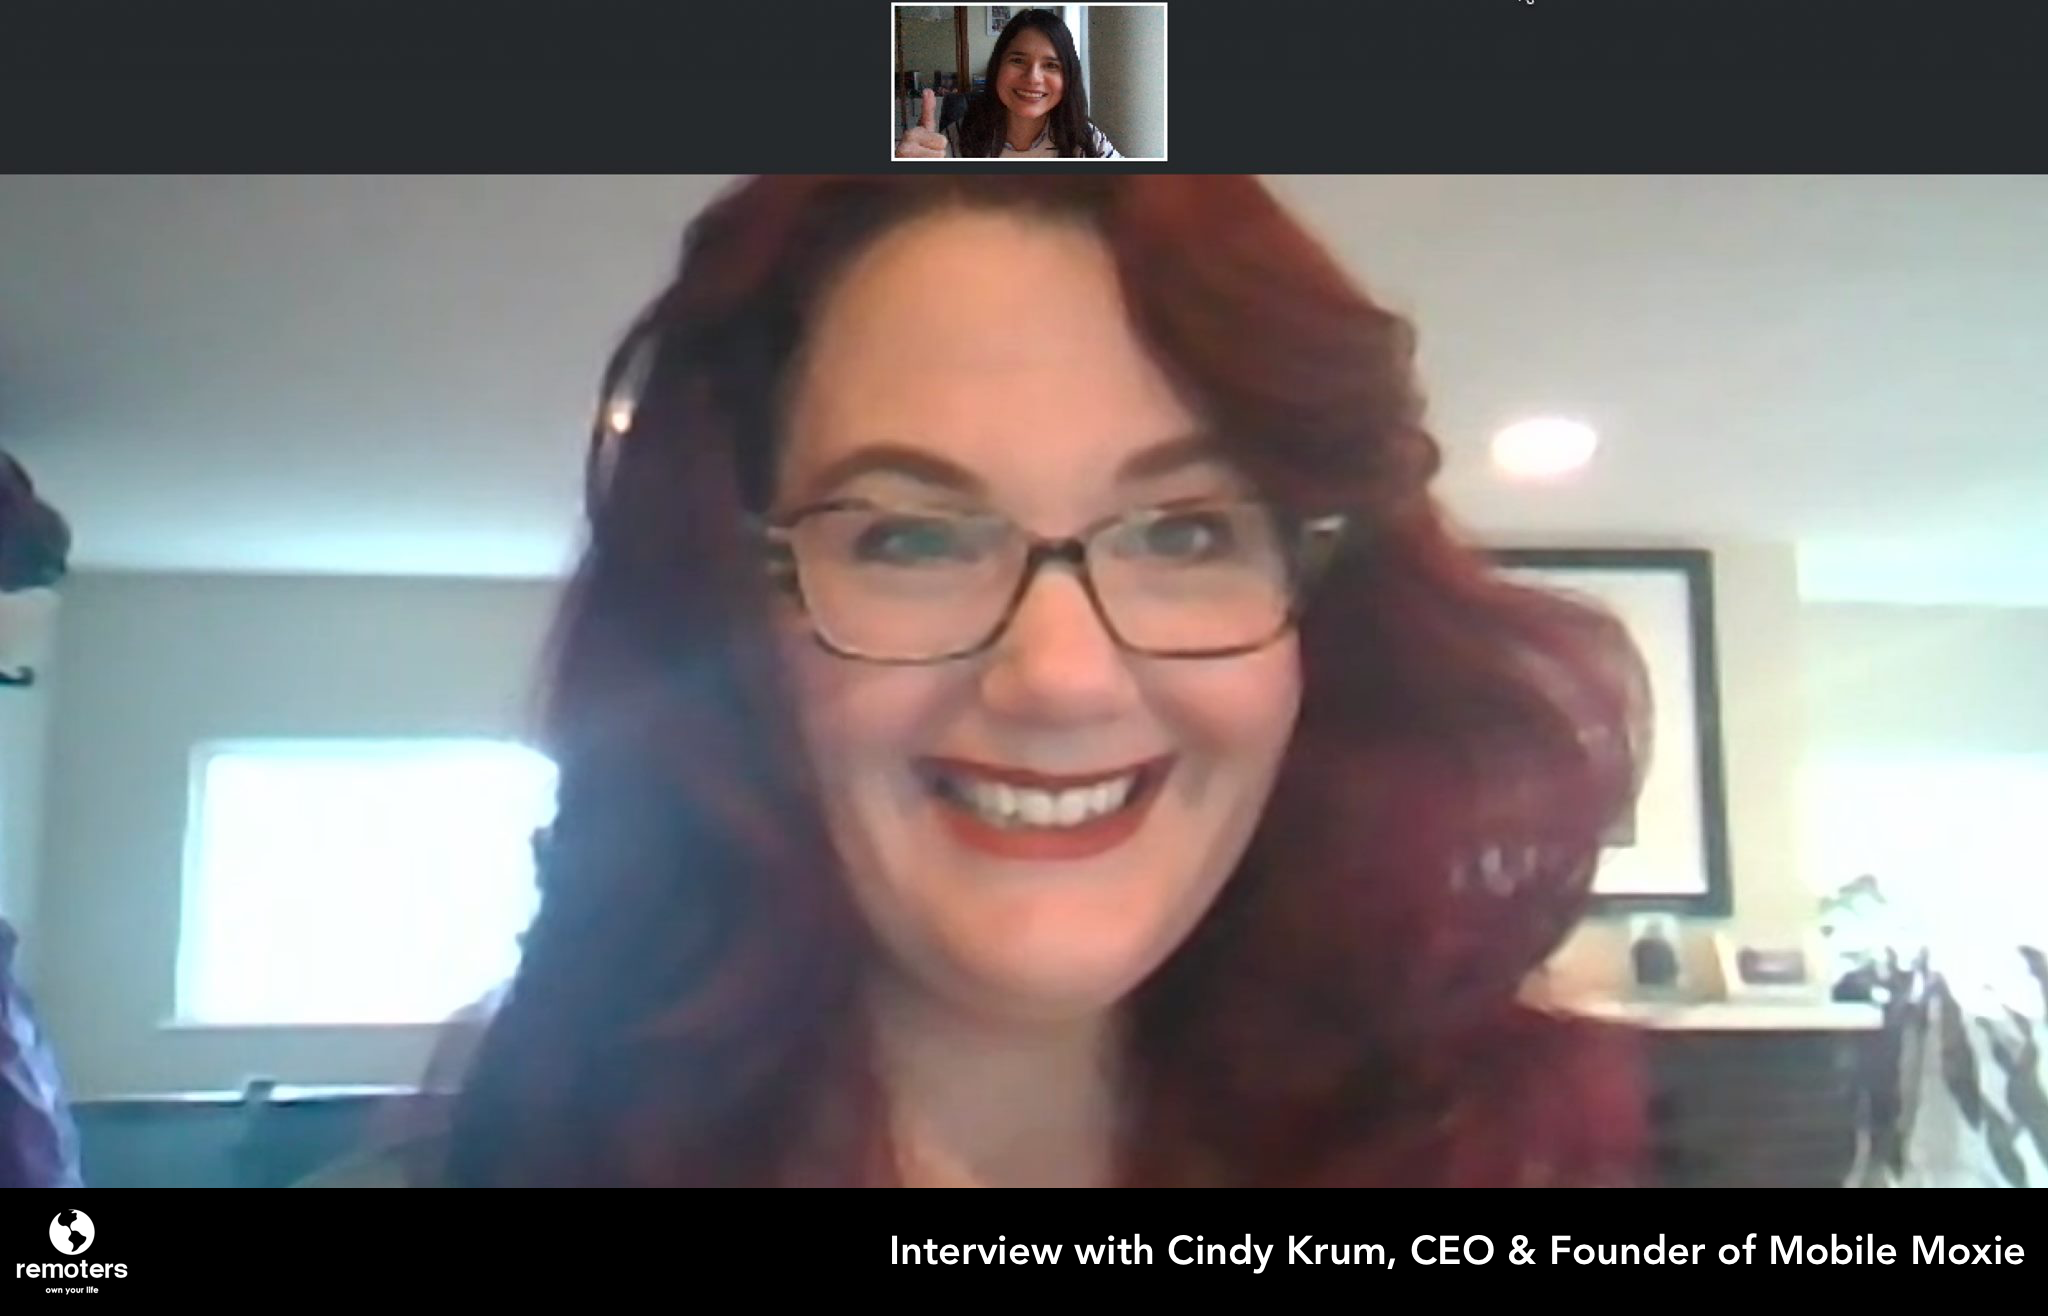 Interview with Cindy Krum, CEO & Founder at Mobile Moxie